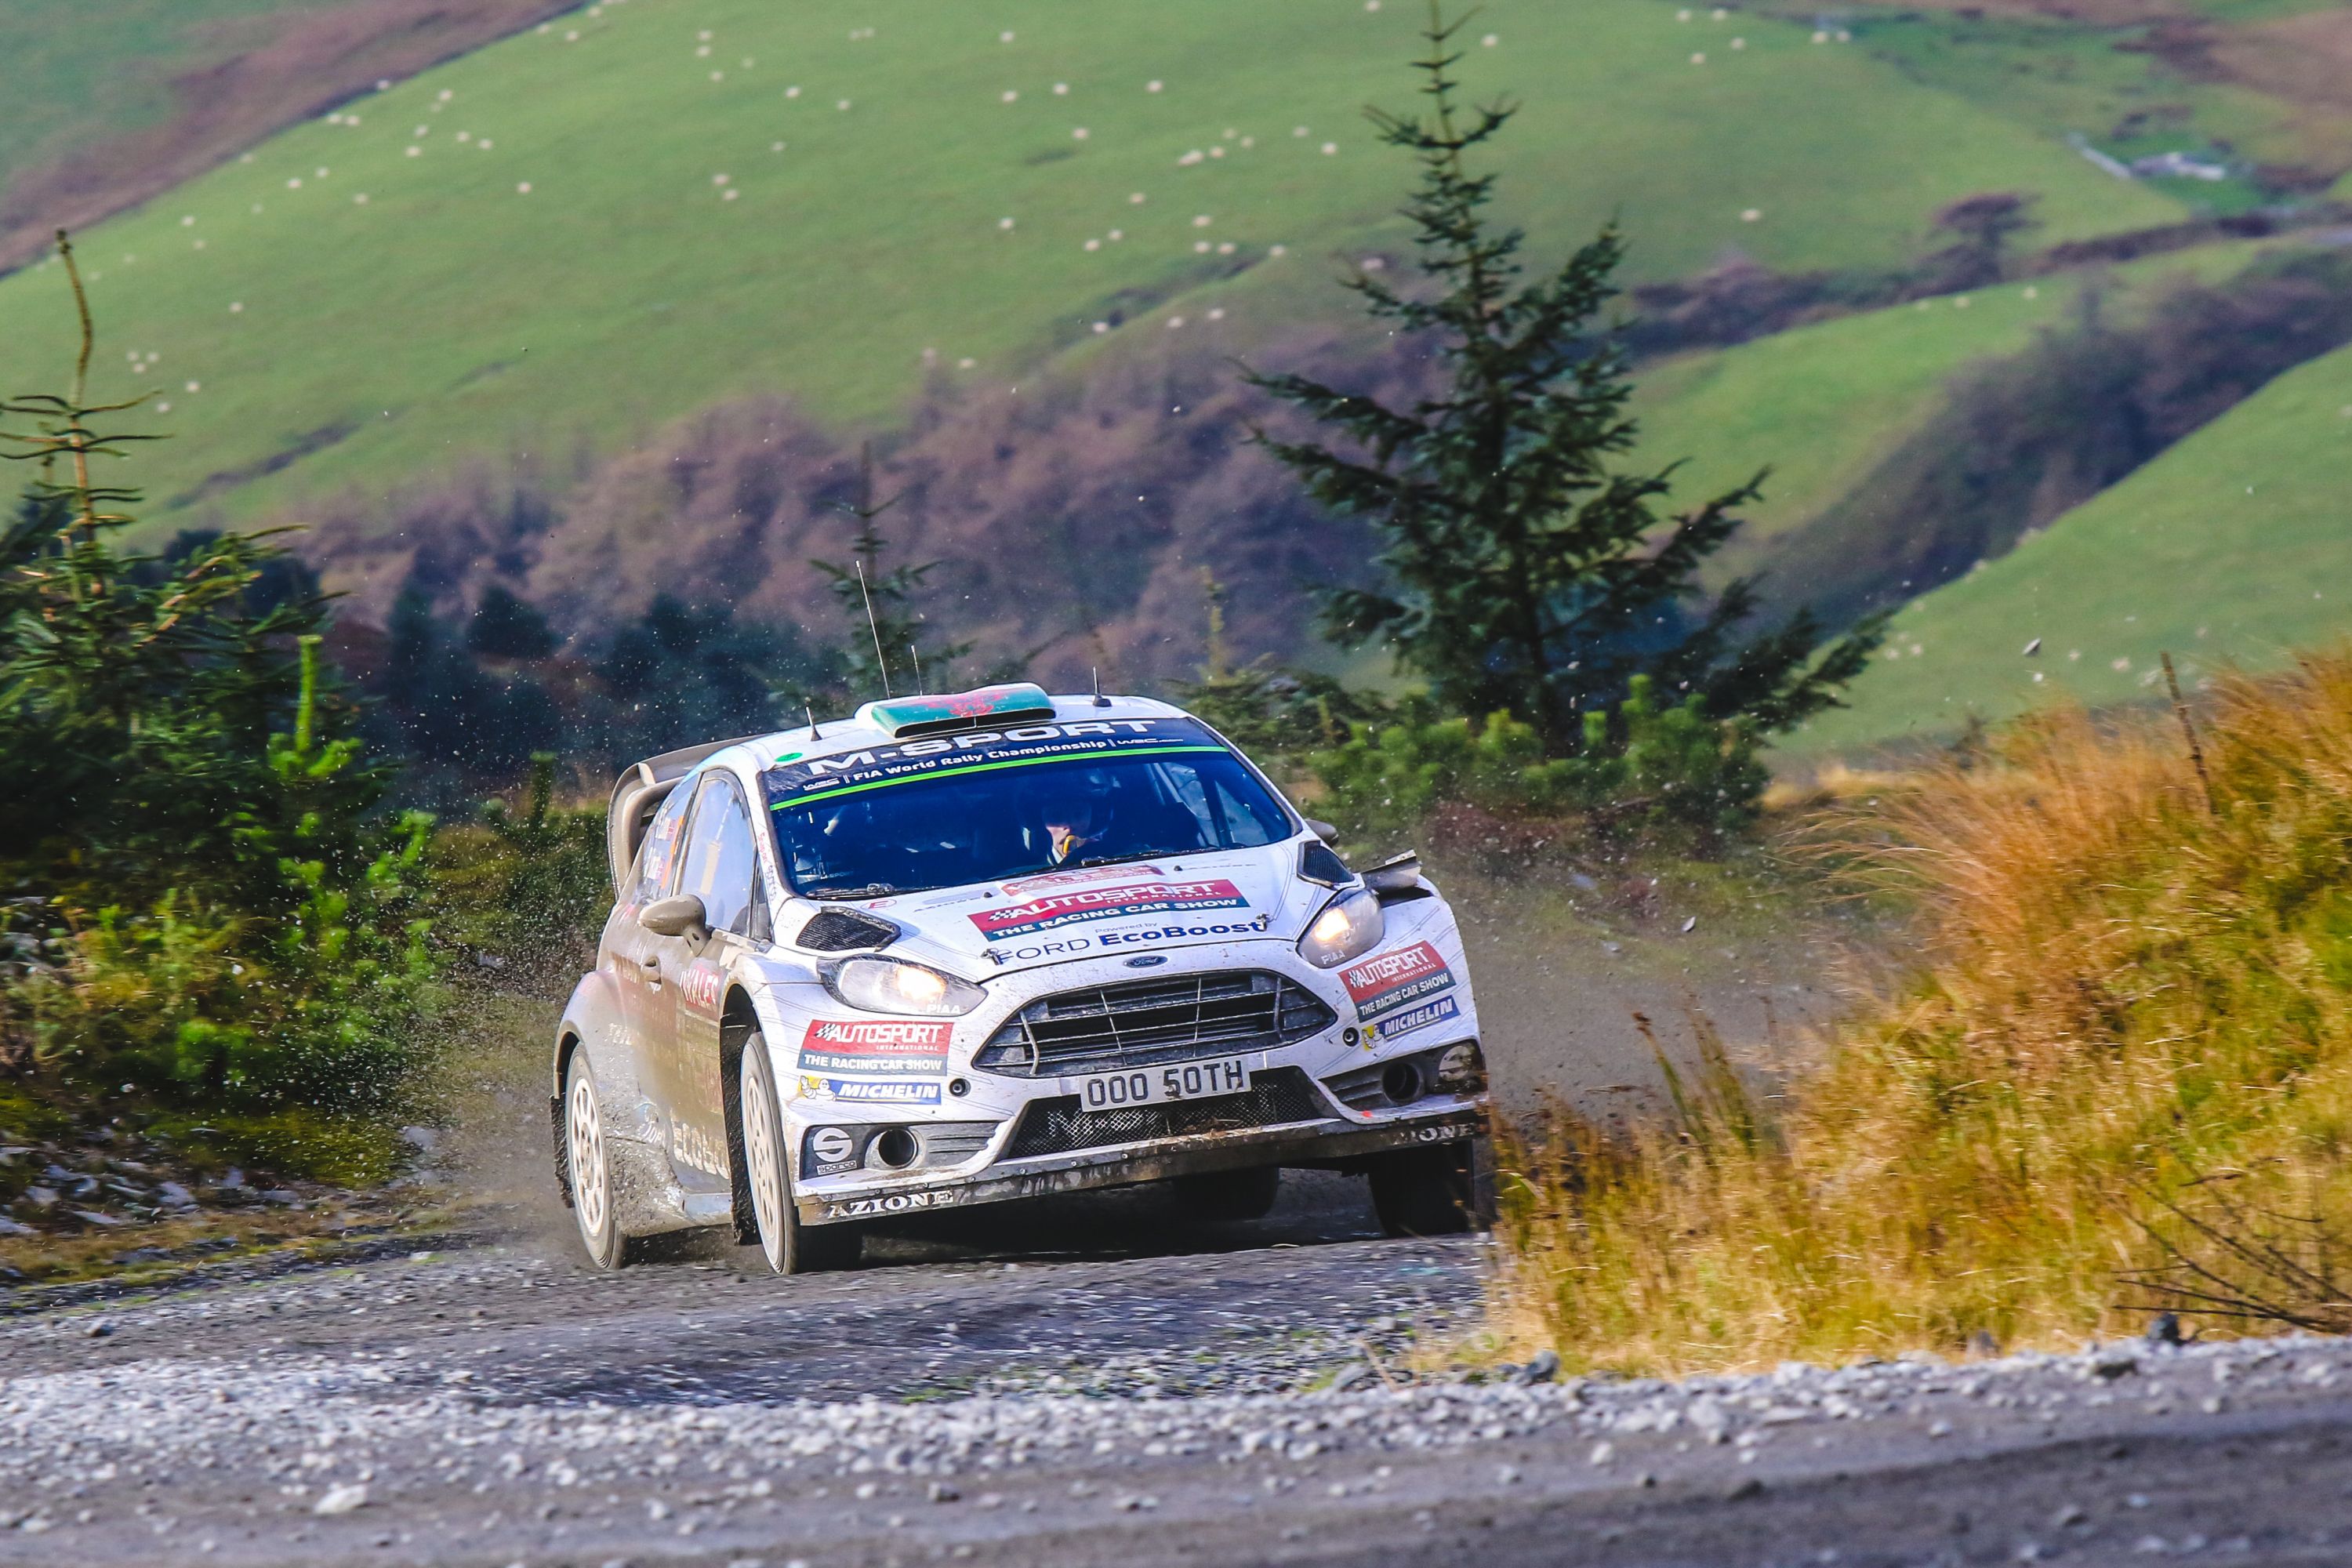 EVANS SALVAGES SIXTH ON HOME SOIL